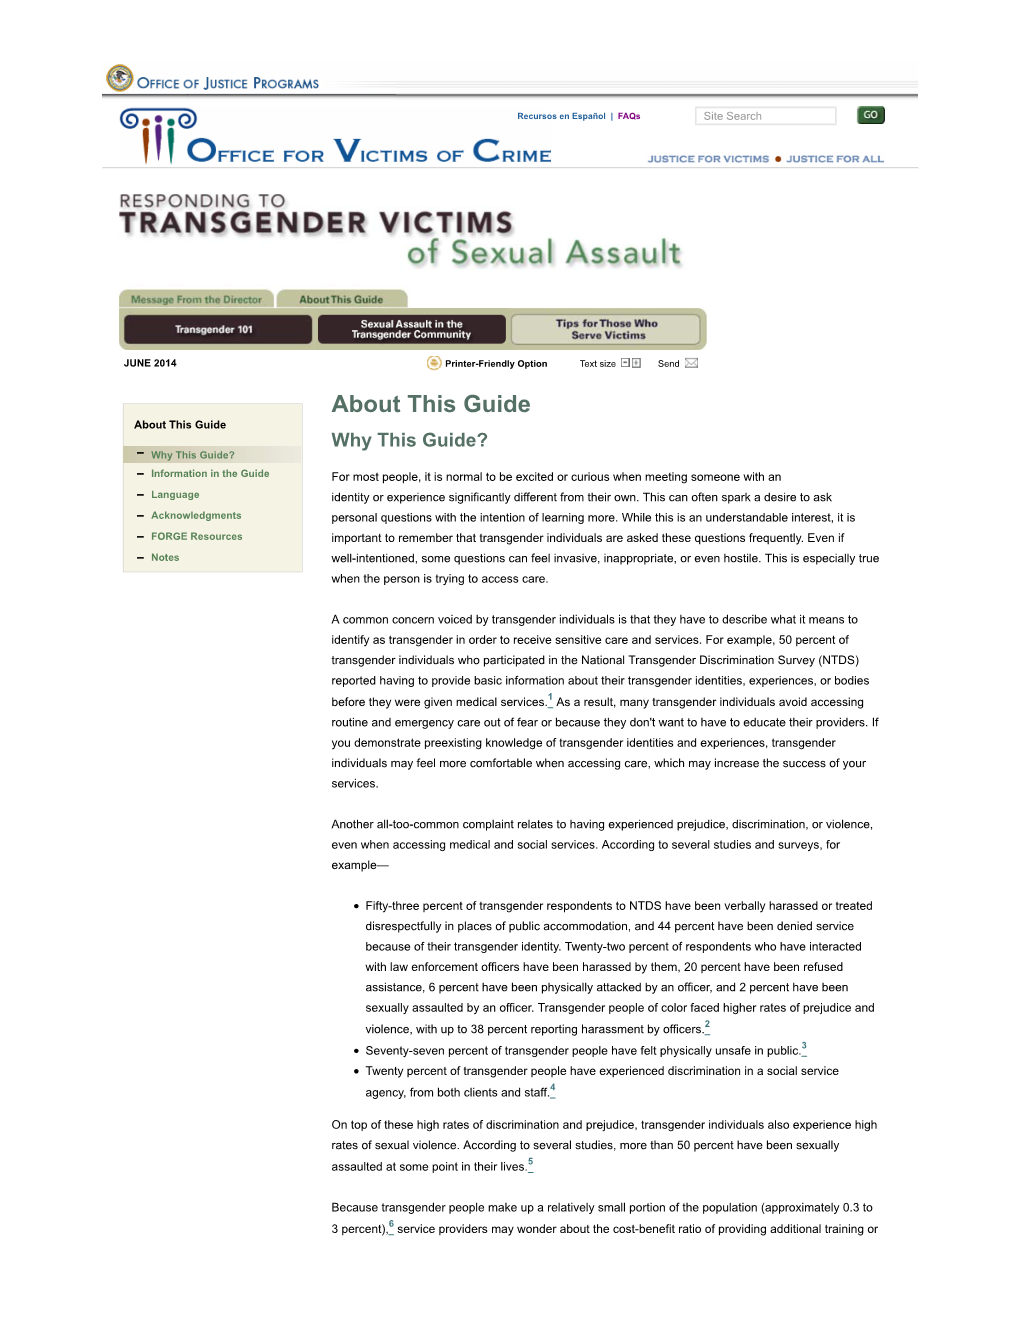 About This Guide, Responding to Transgender Victims of Sexual Assault